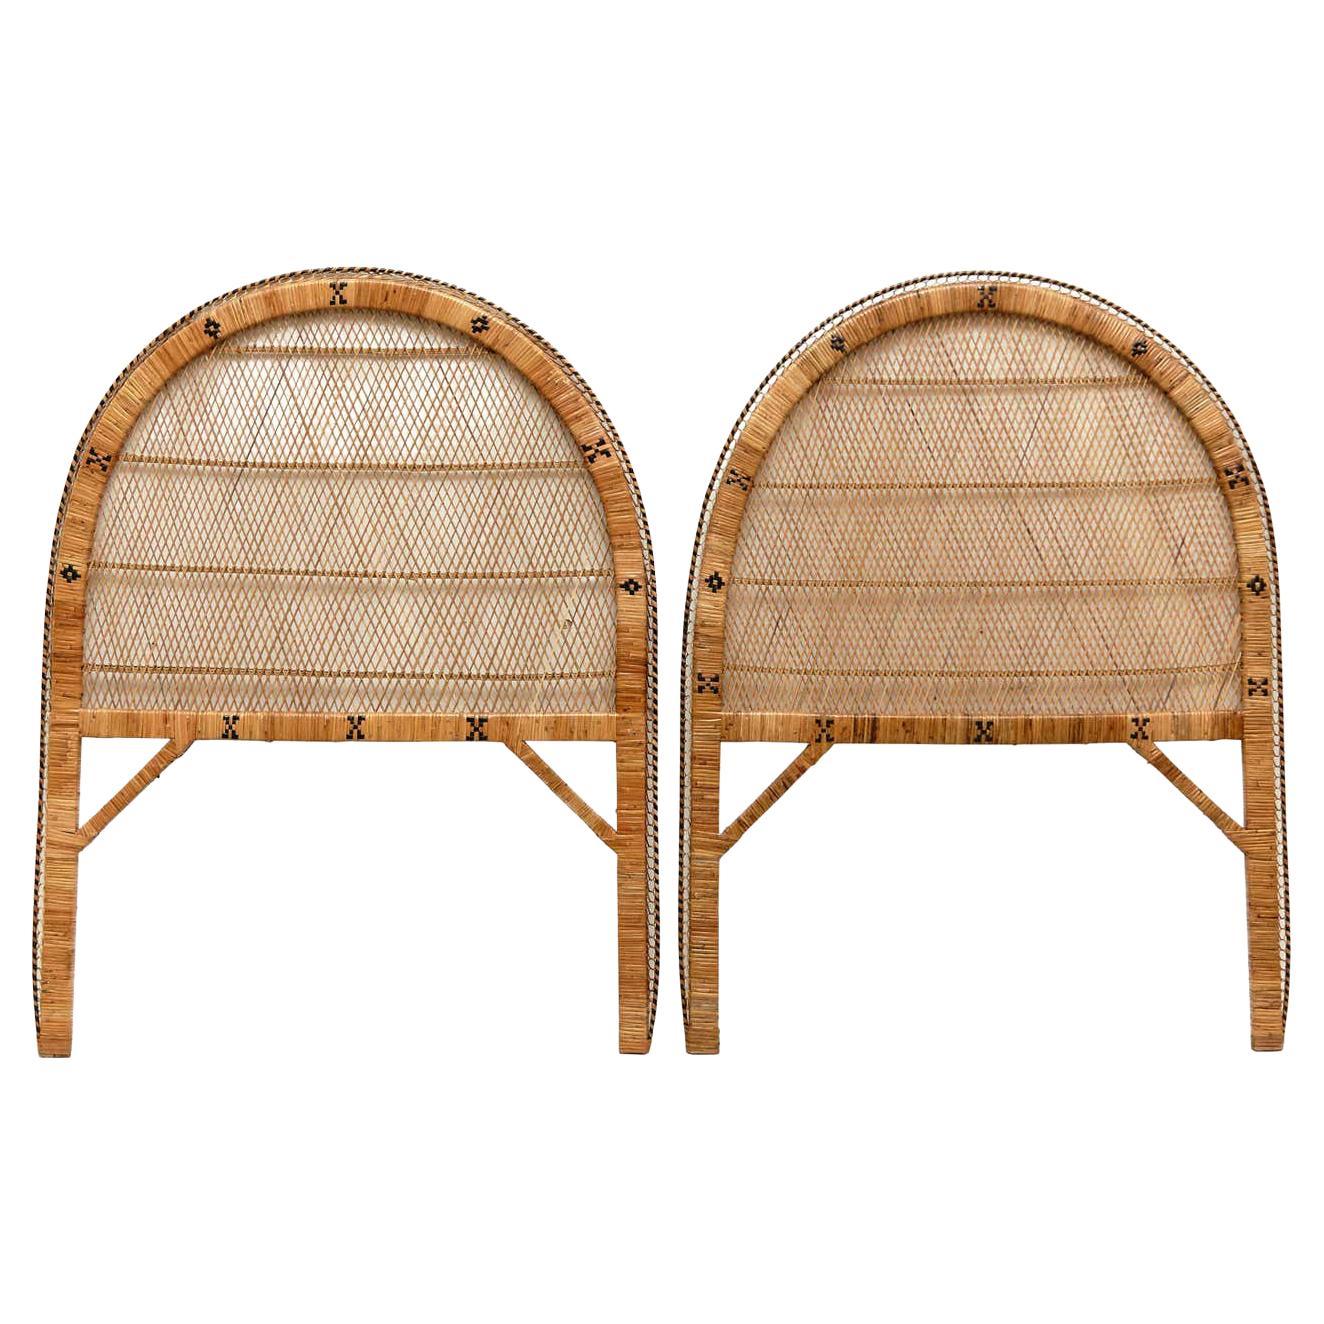 Pair of Mid-Century Modern Bamboo and Rattan Headboard Handcrafted French, 1960